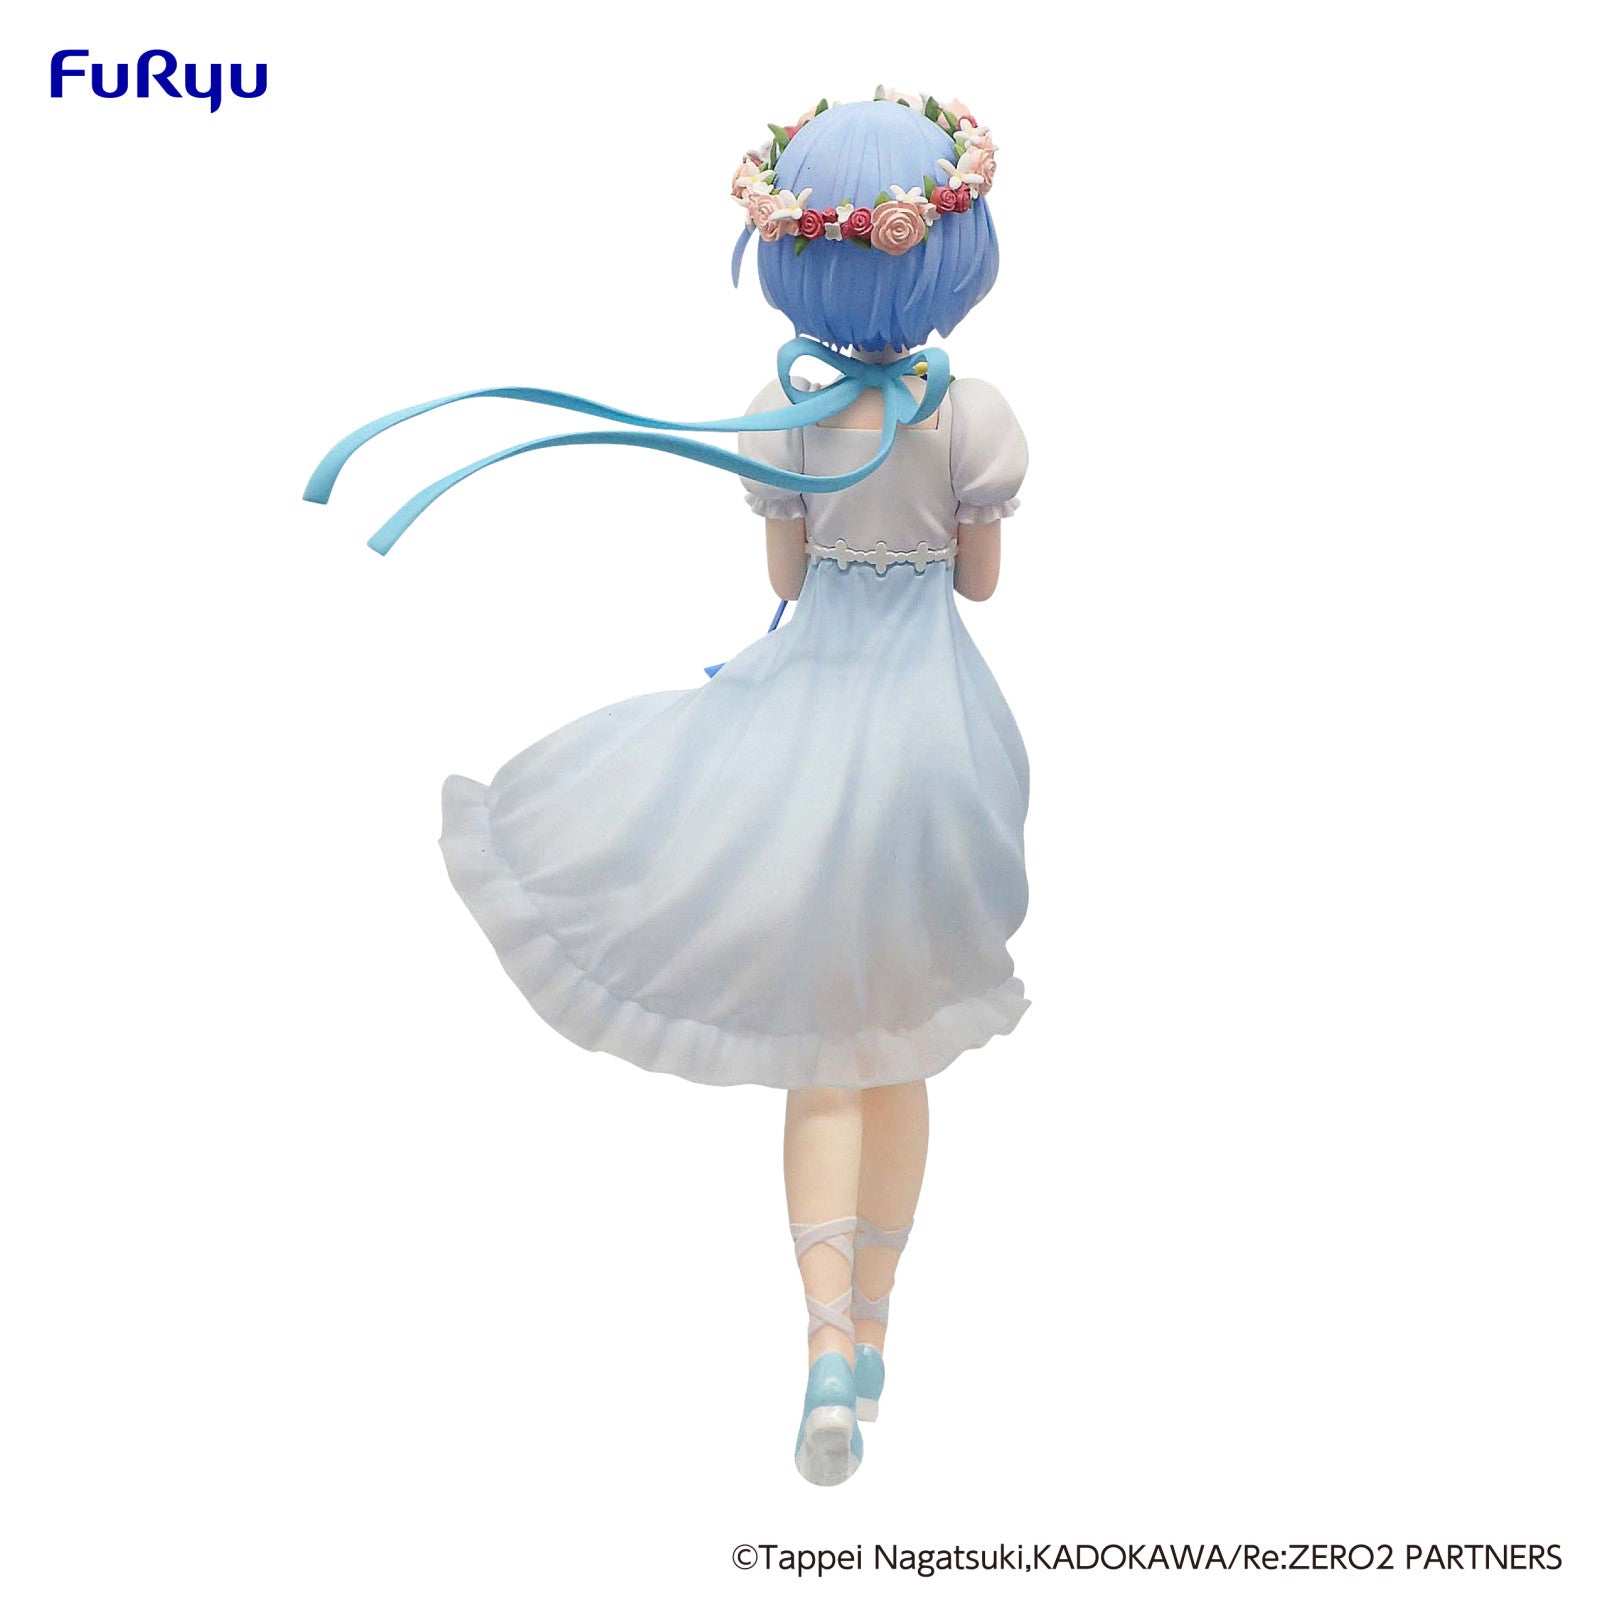 Re:ZERO Starting Life in Another World: TRIO TRY IT FIGURE - Rem Bridesmaid